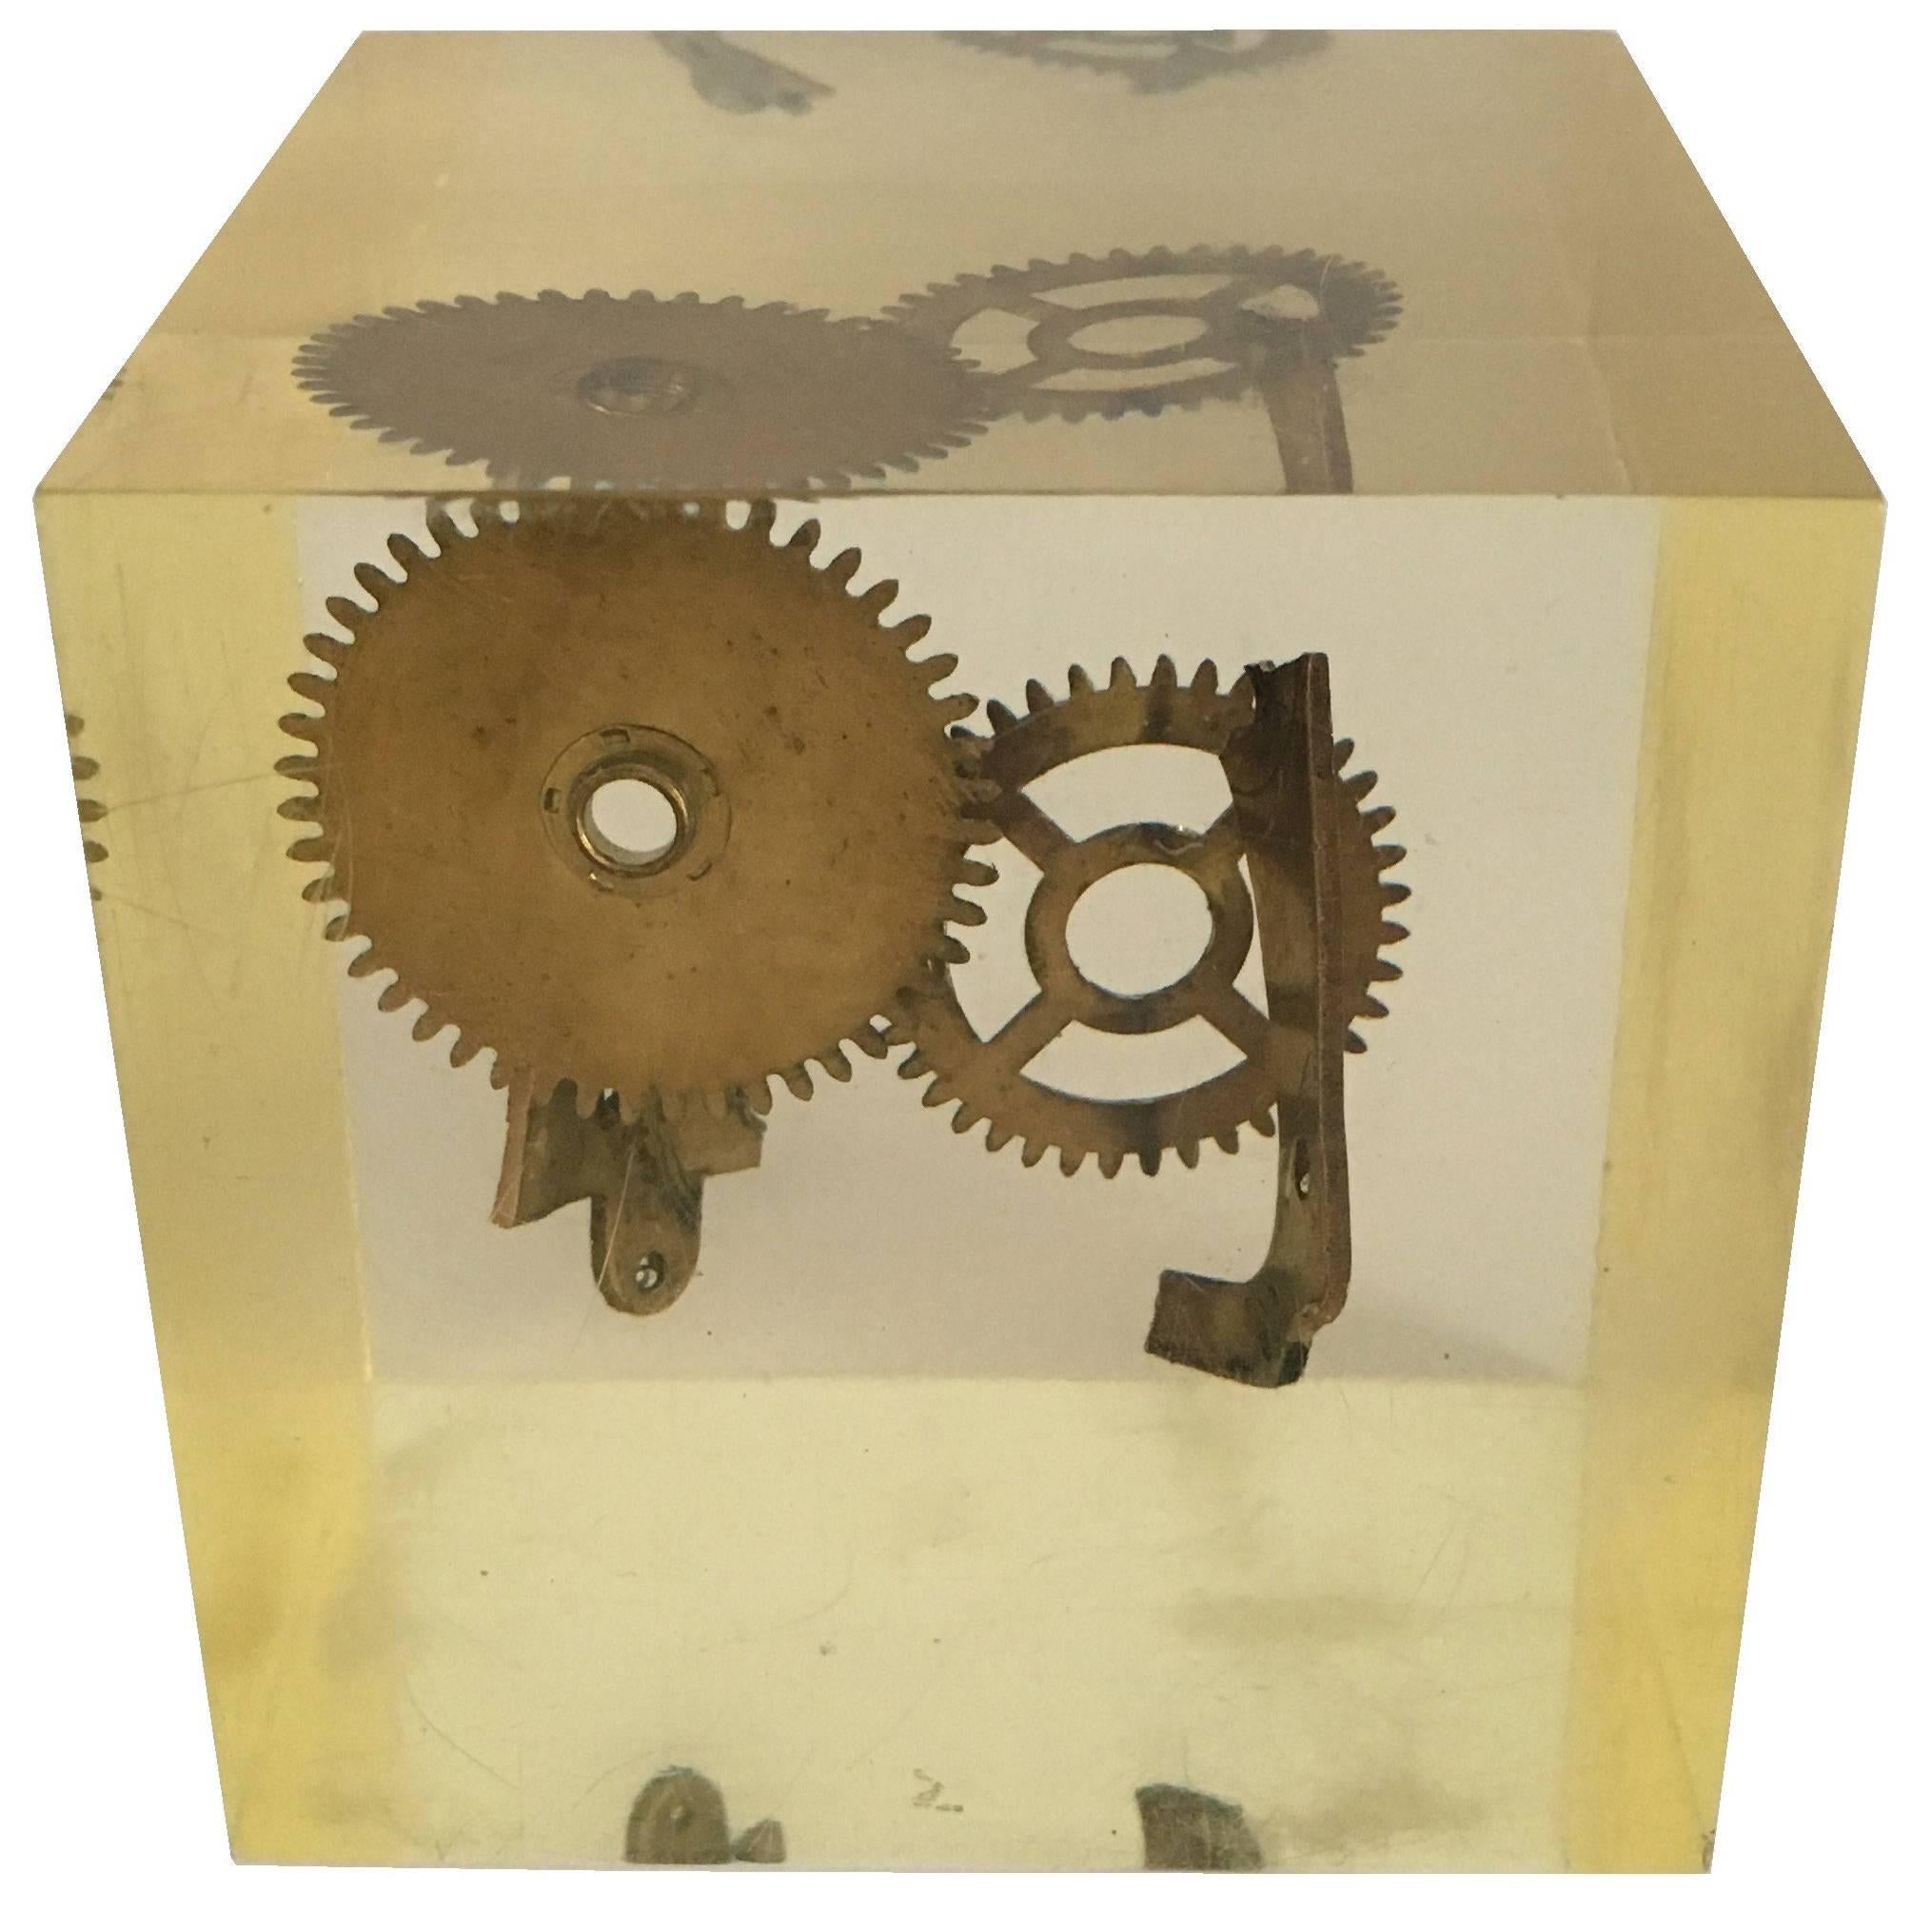 1970s Lucite Cube Gears Sculpture Paperweight by Pierre Giraudon